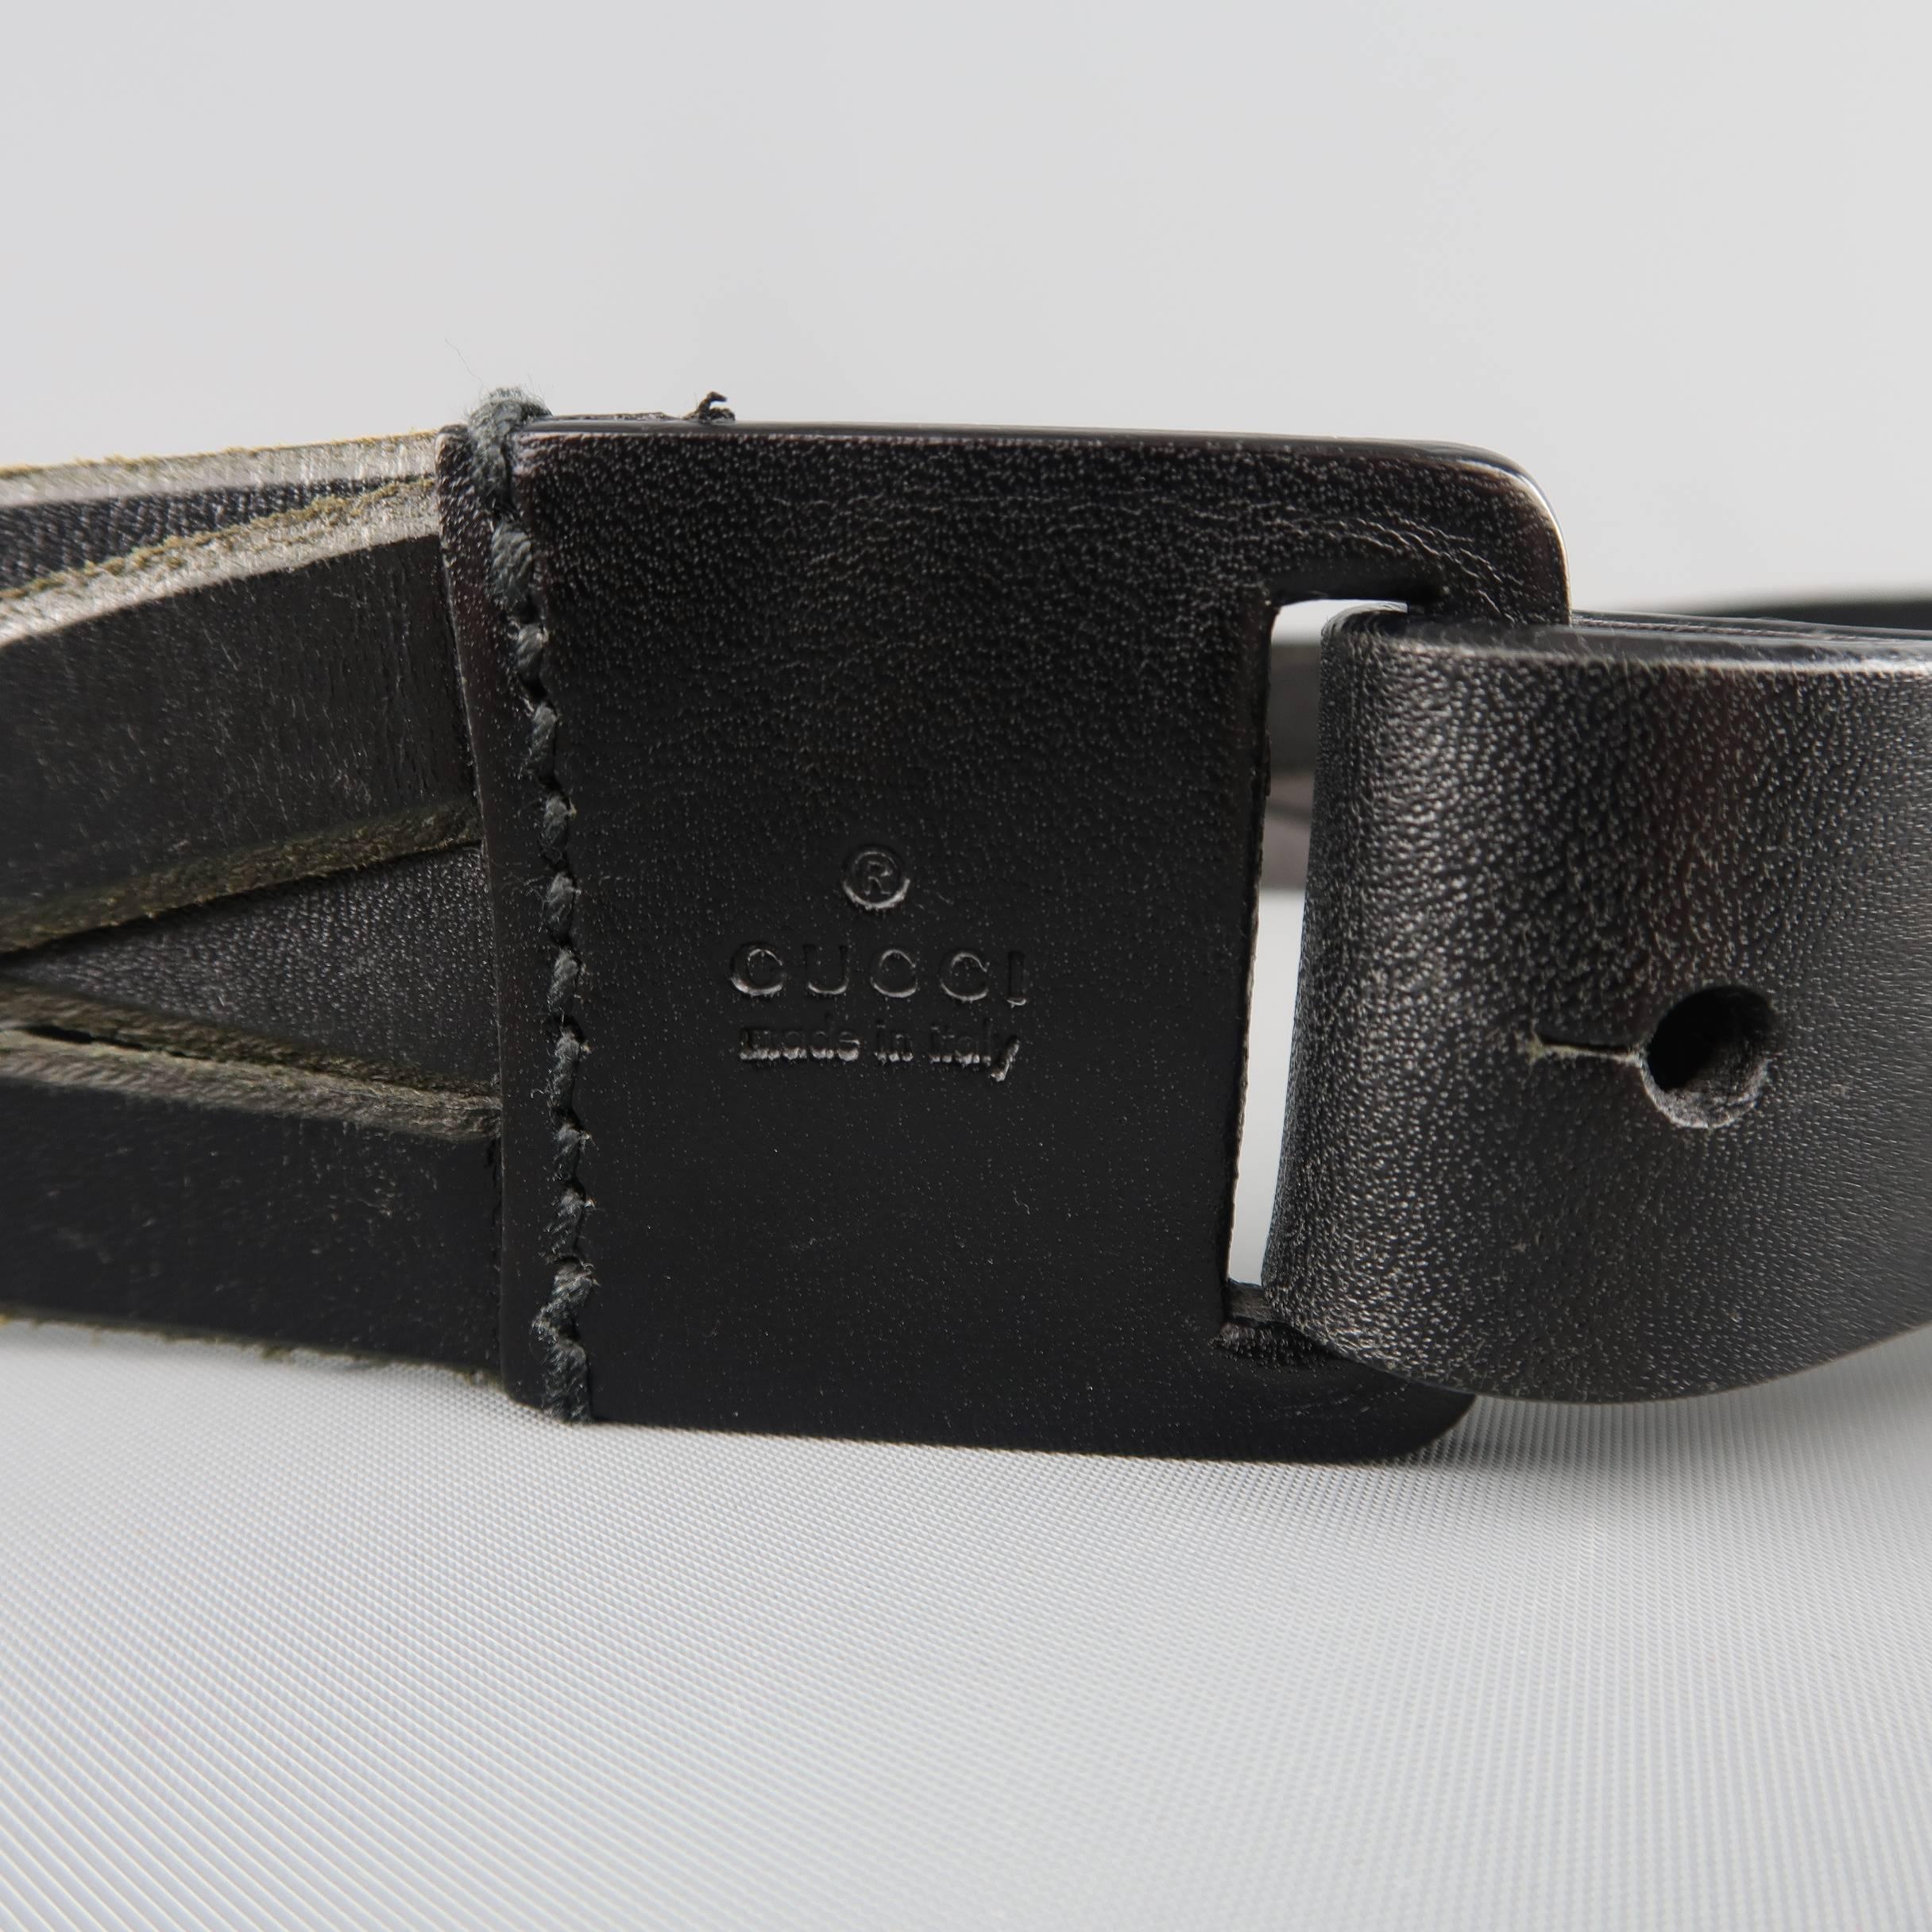 GUCCI belt features a braided woven black leather strap with embossed leather buckle and button stud closure. Made in Italy.
 
Good Pre-Owned Condition.
Marked: 85.34
 
Length: 39 in.
Width: 1.65 in.
Fits: 34-36 in.


SKU: 85557